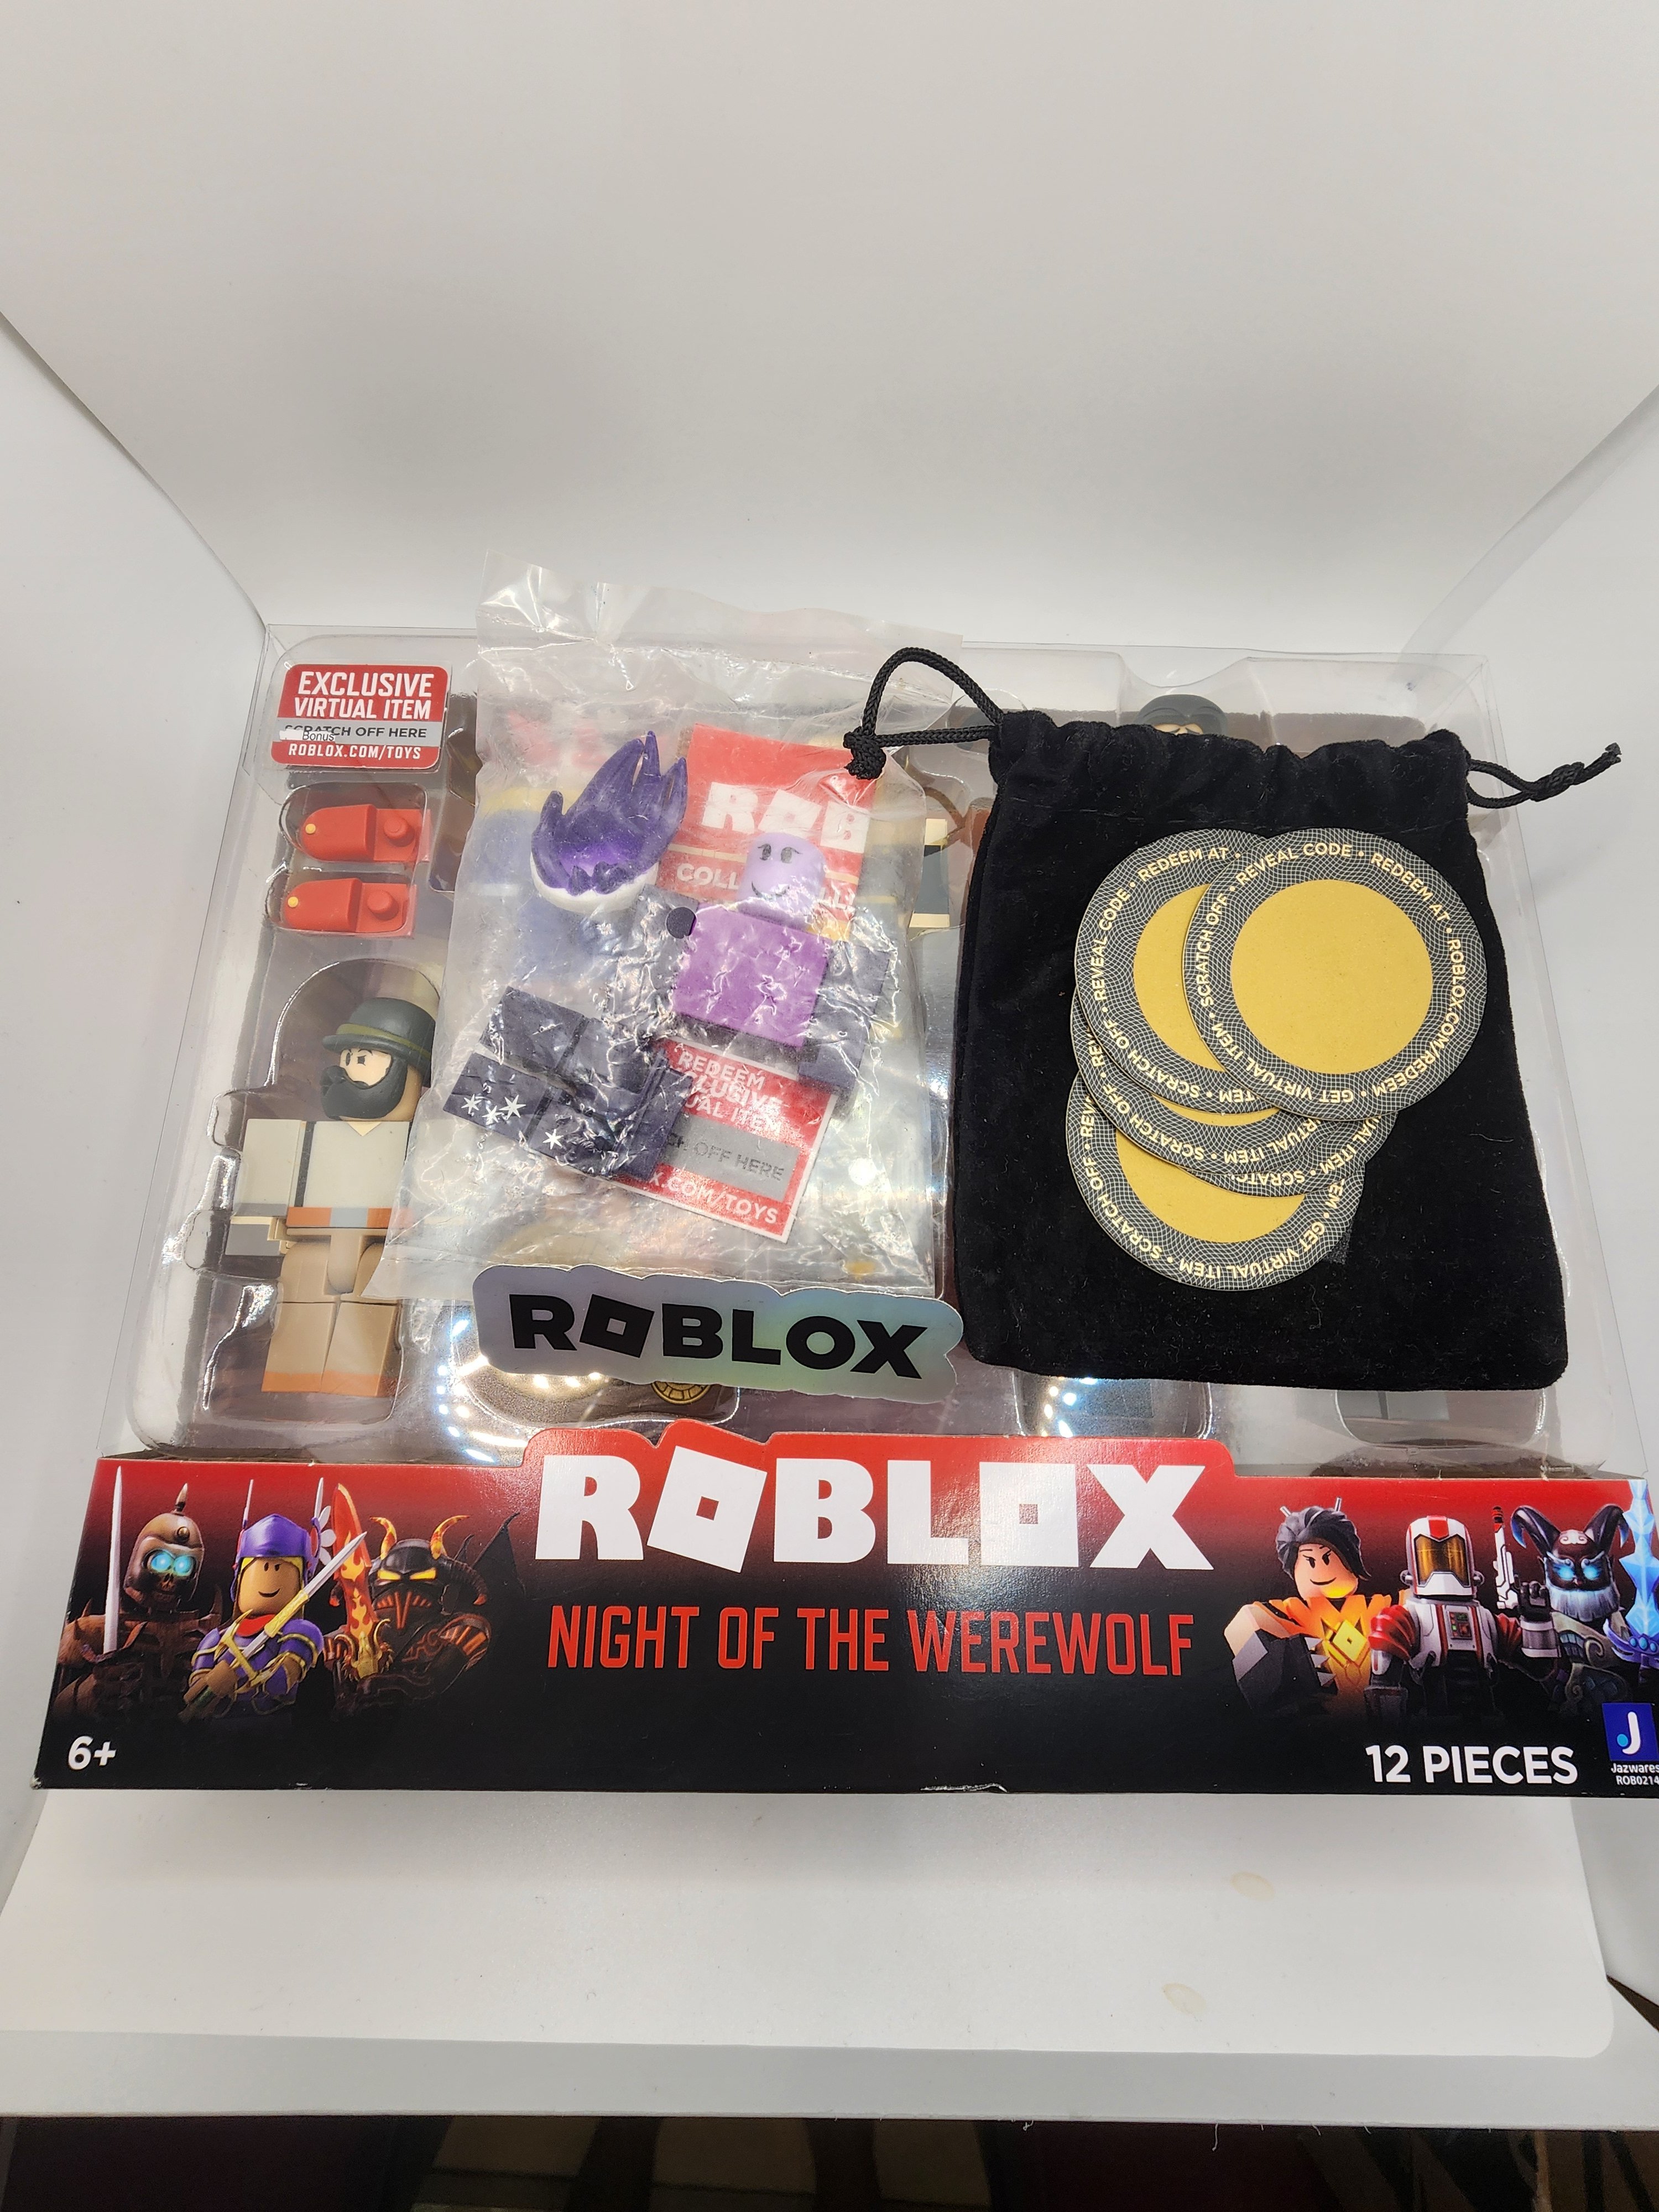 ROBLOX Contest! (CLOSED) WIN all these VIRTUAL ITEM CODES from the TOY  packs! FREE CODE giveaway! 